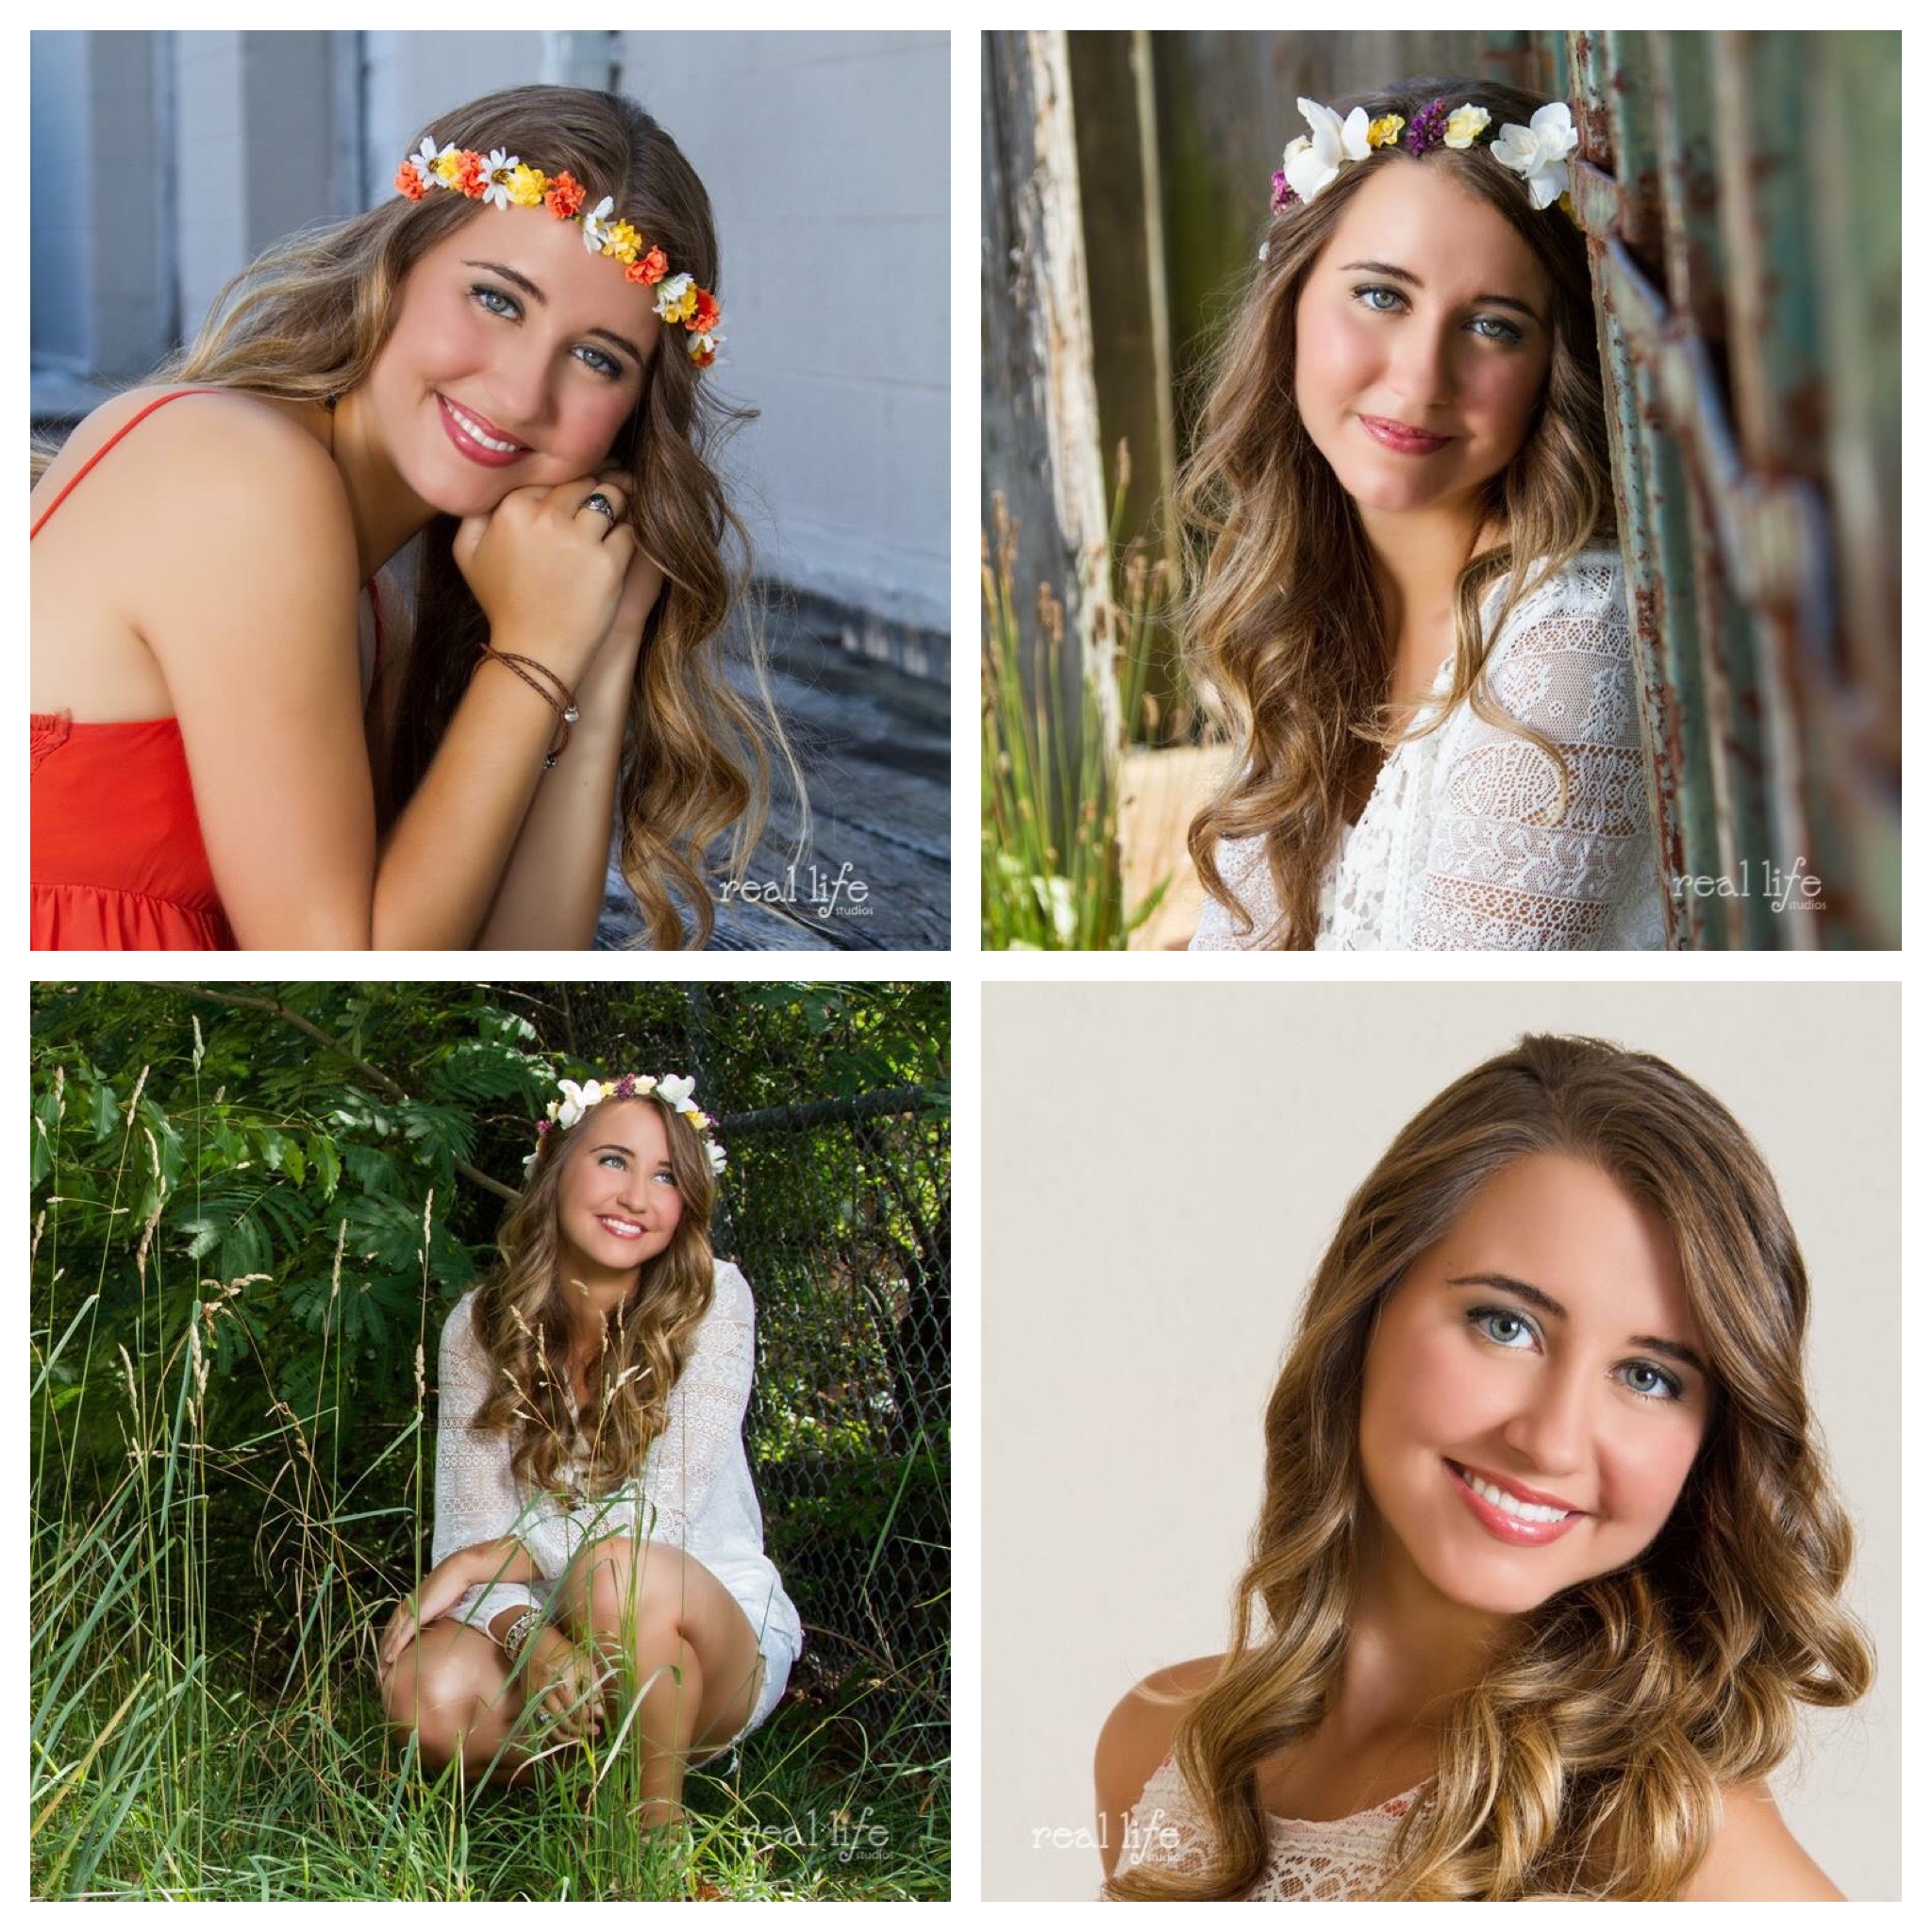 Senior portraits of girl wearing floral crown